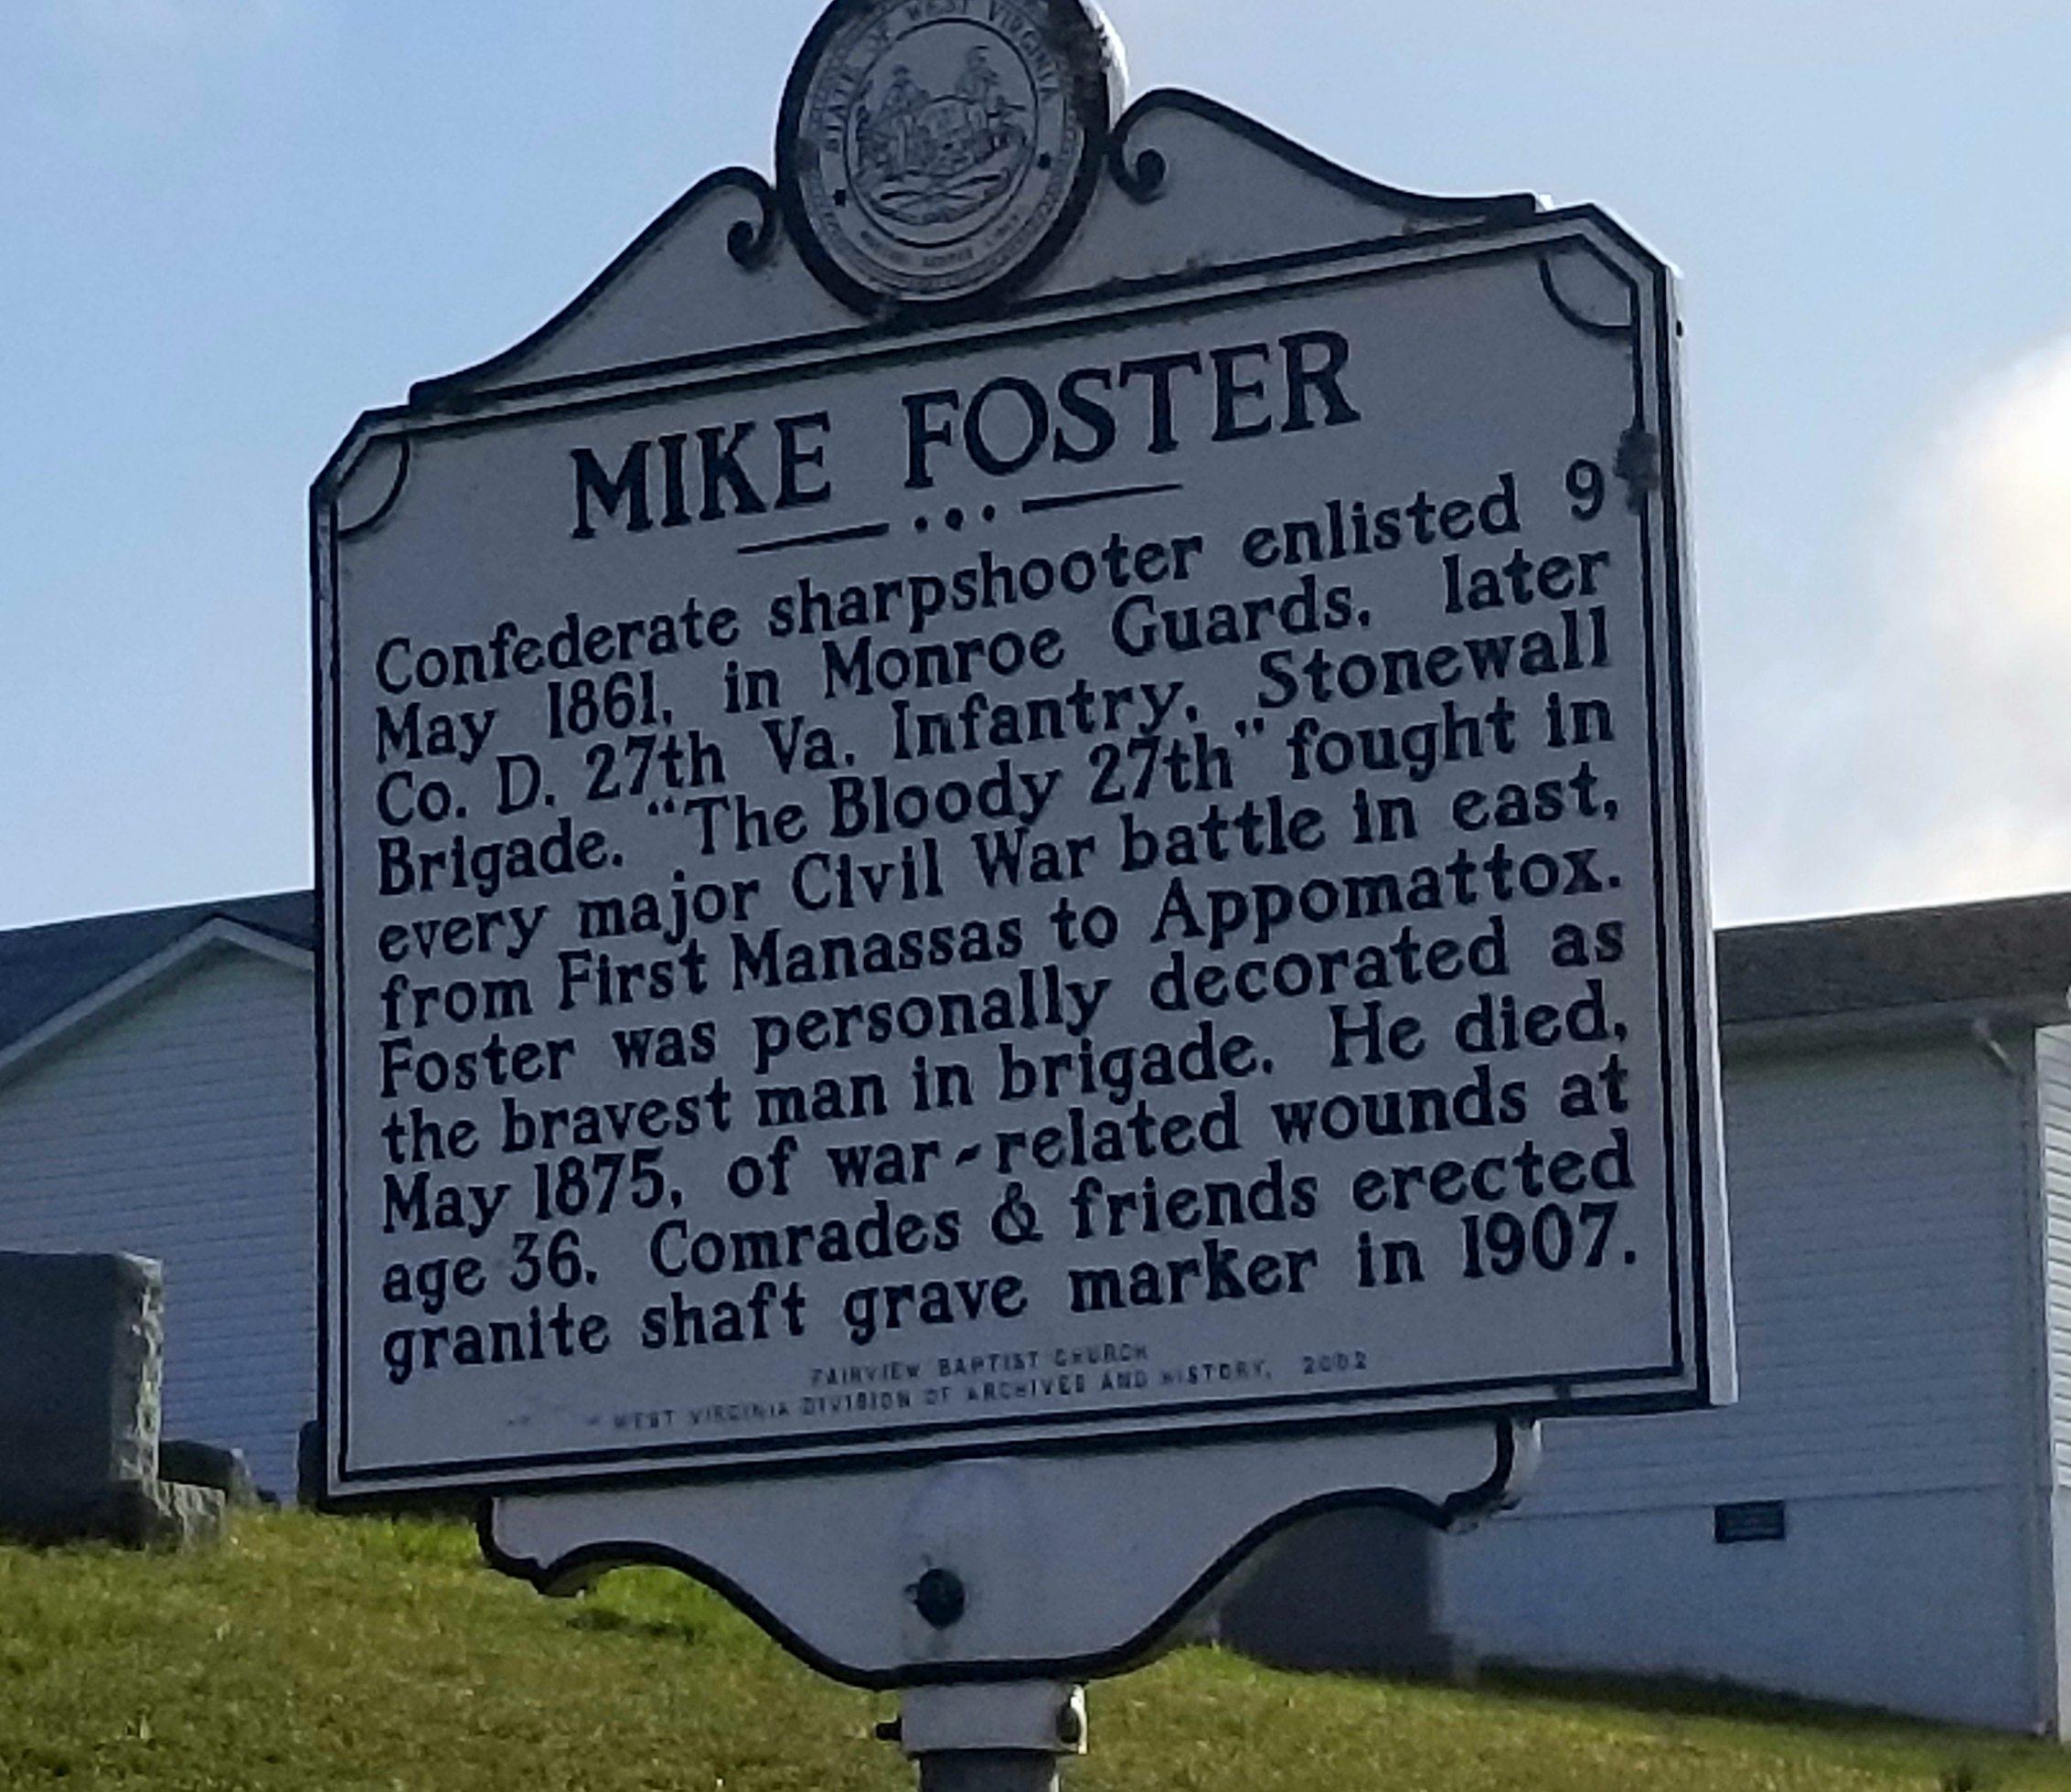 The historical marker at the edge of the cemetery. Provides a brief history of Foster, his enlistment date of May 9, 1861 and served in the Stonewall Brigade.